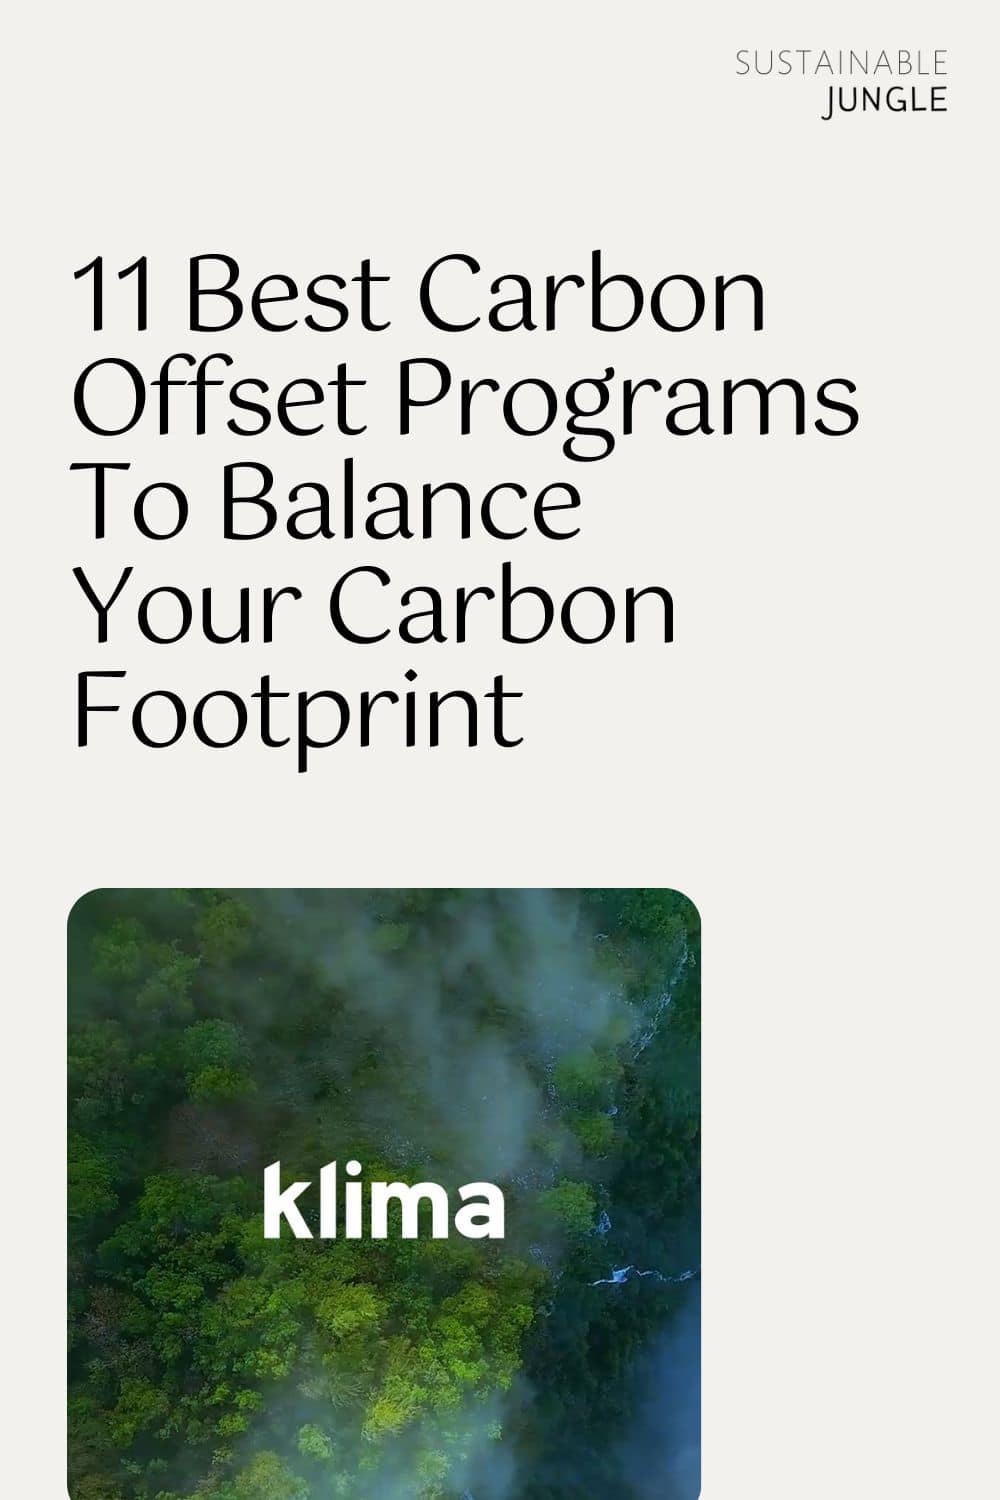 9 Best Carbon Offset Programs To Balance Your Carbon Footprint Image by Klima #bestcarbonoffsetprograms #carbonoffsetproviders #carbonoffsetcompanies #wheretobuycarbonoffsets #bestcarbonoffsetproviders #sustainablejungle